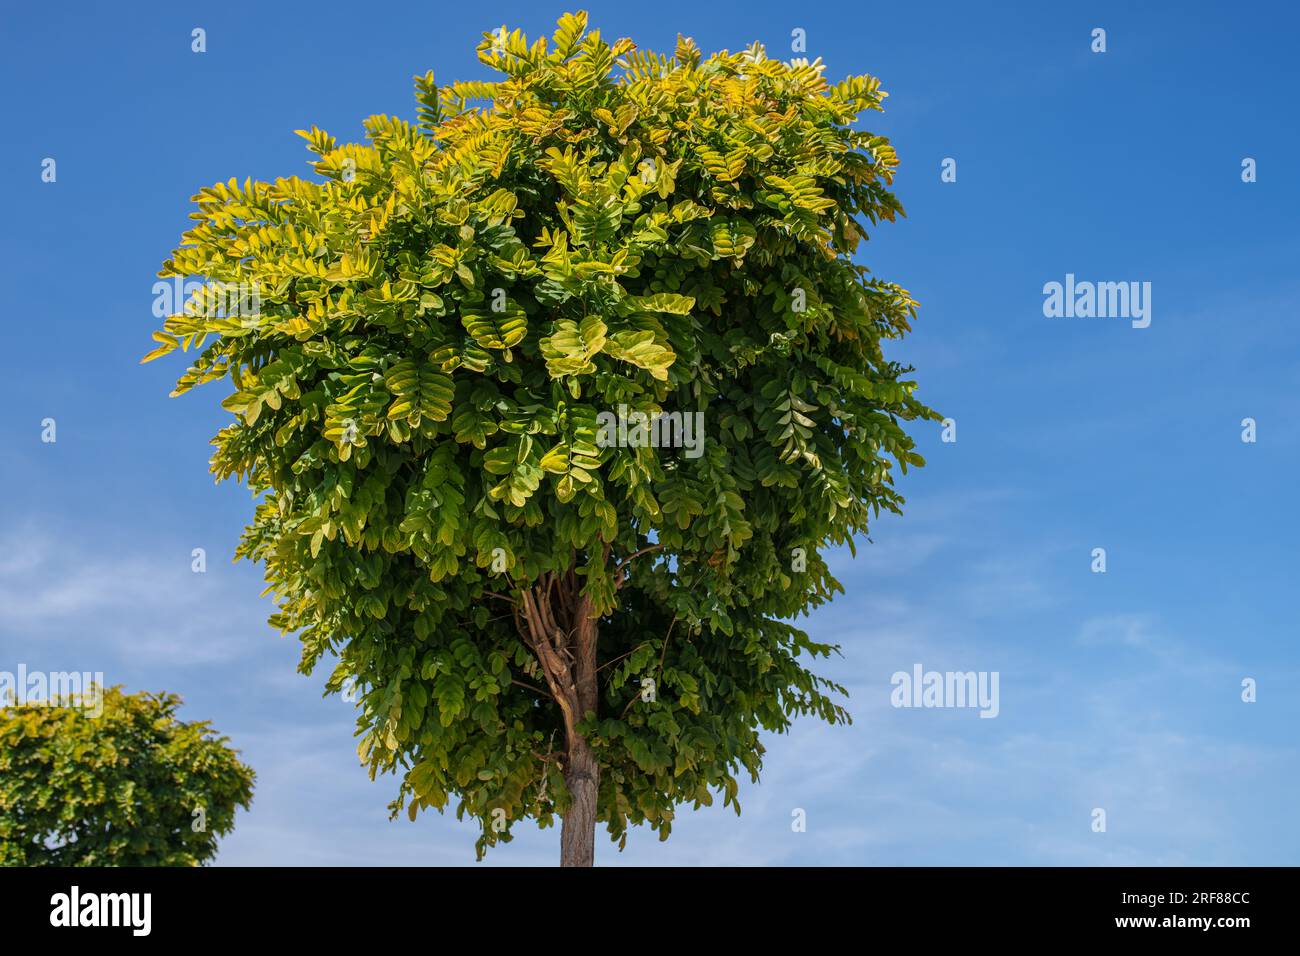 Small green tree on blue sky background Stock Photo